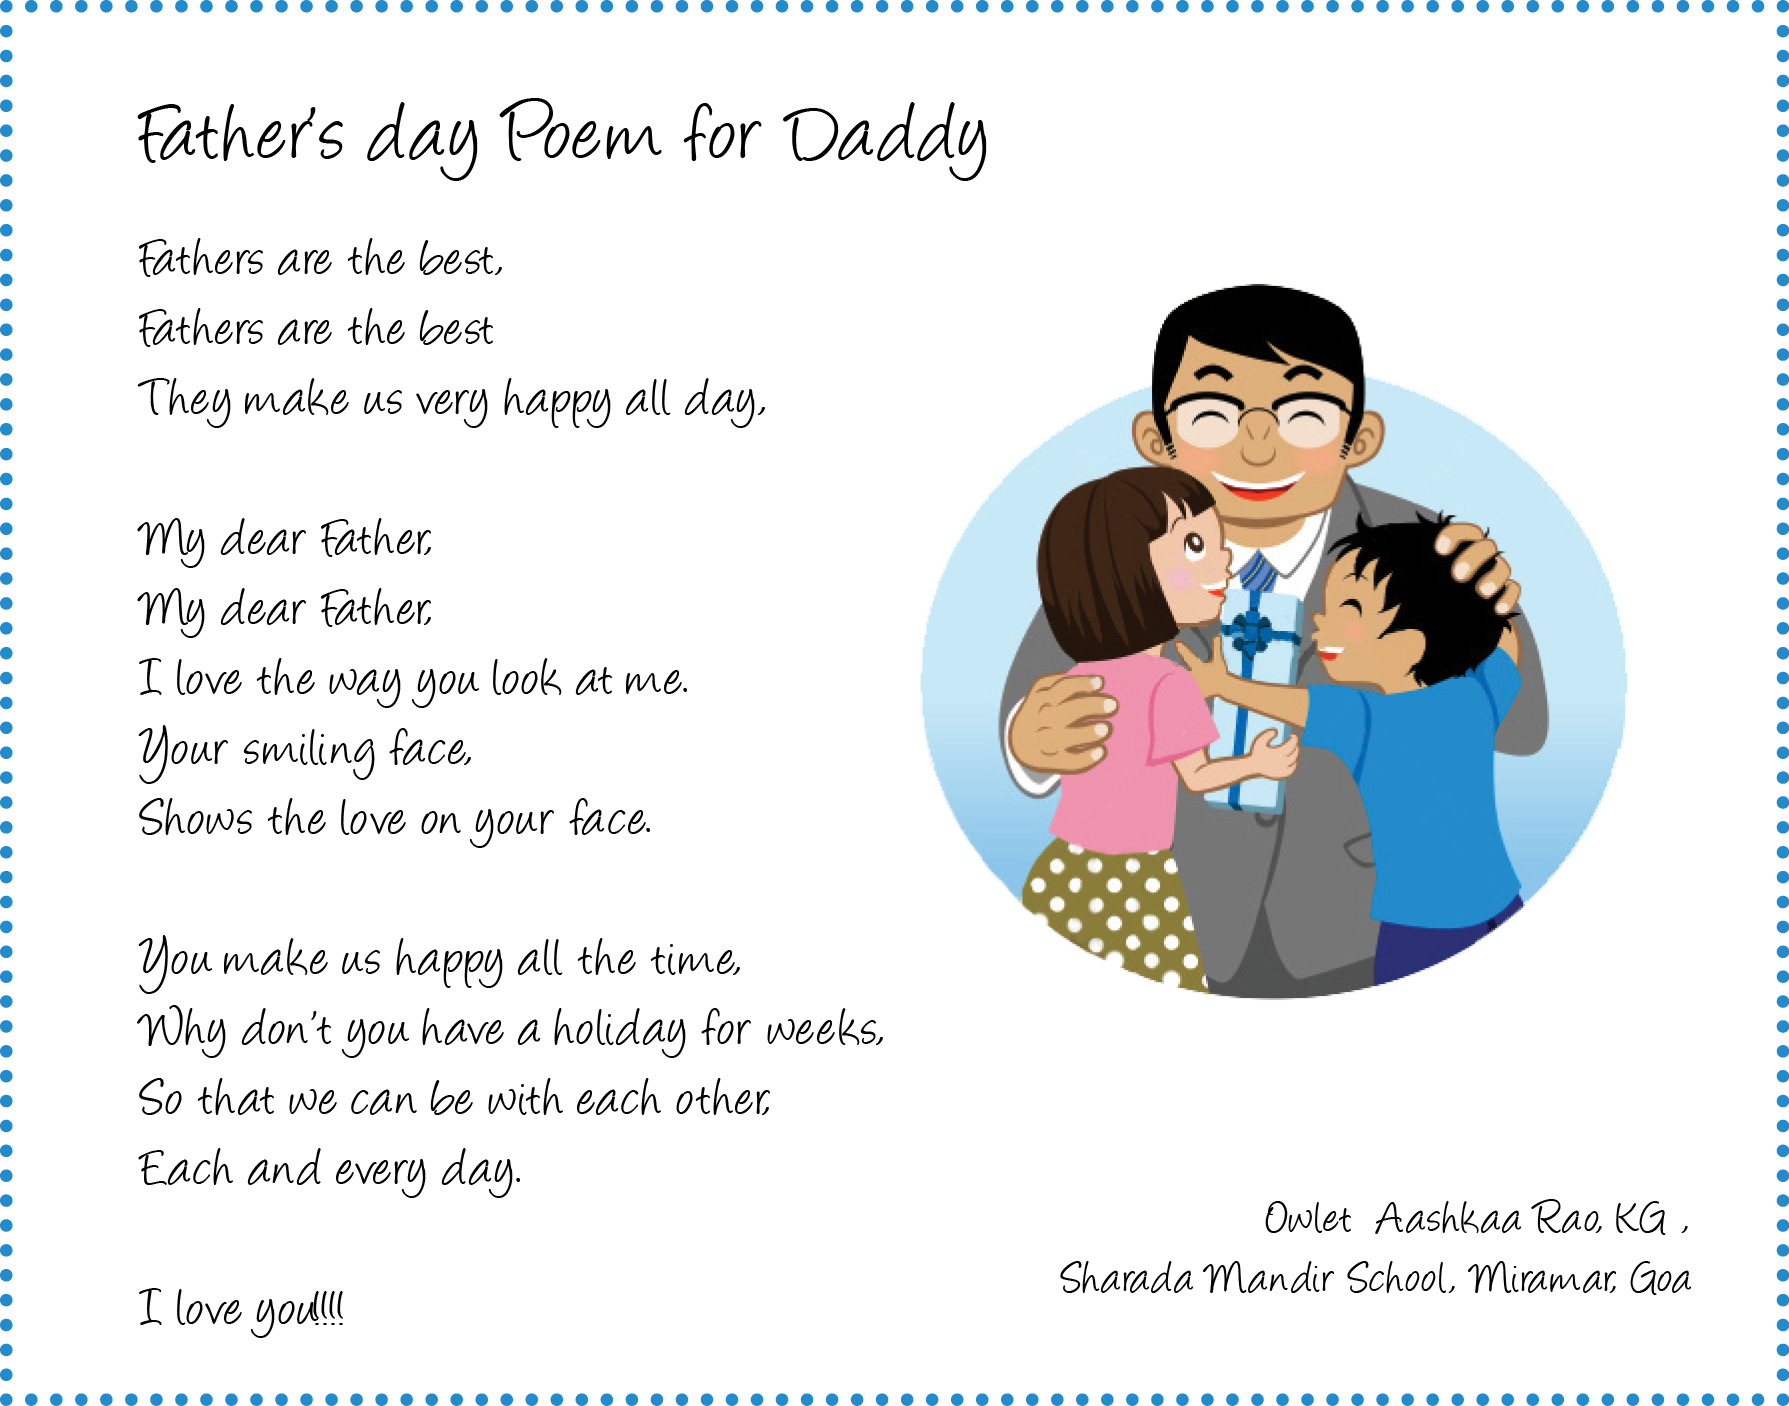 Father’s day Poem for Daddy